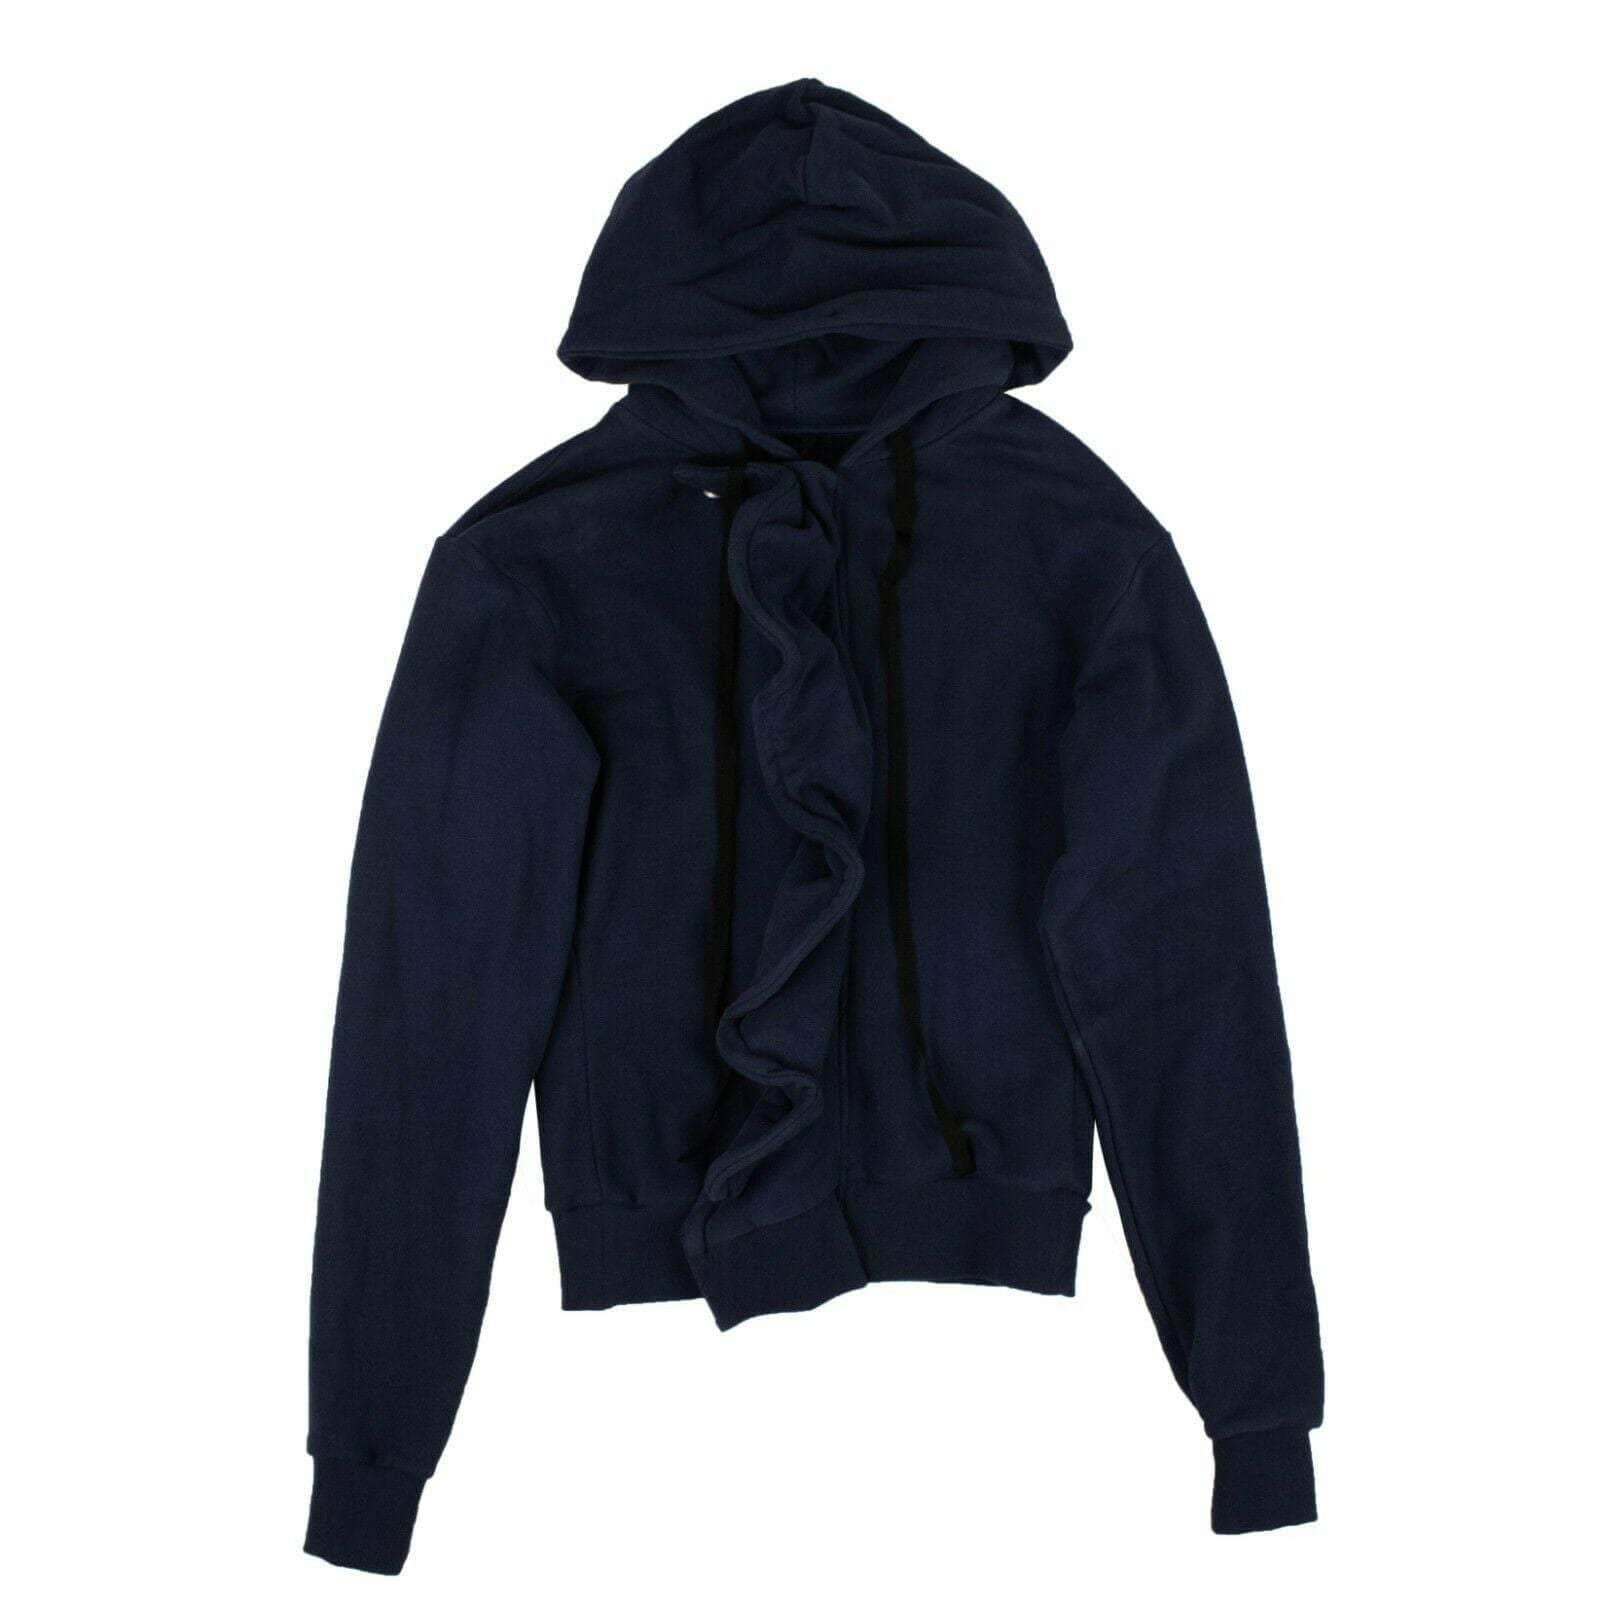 UNRAVEL PROJECT channelenable-all, couponcollection, gender-mens, main-clothing, size-s, under-250, unravel-project S / 82NGG-UN-1103/S Navy Blue Ruffle Zip Up Hooded Sweatshirt 82NGG-UN-1103/S 82NGG-UN-1103/S